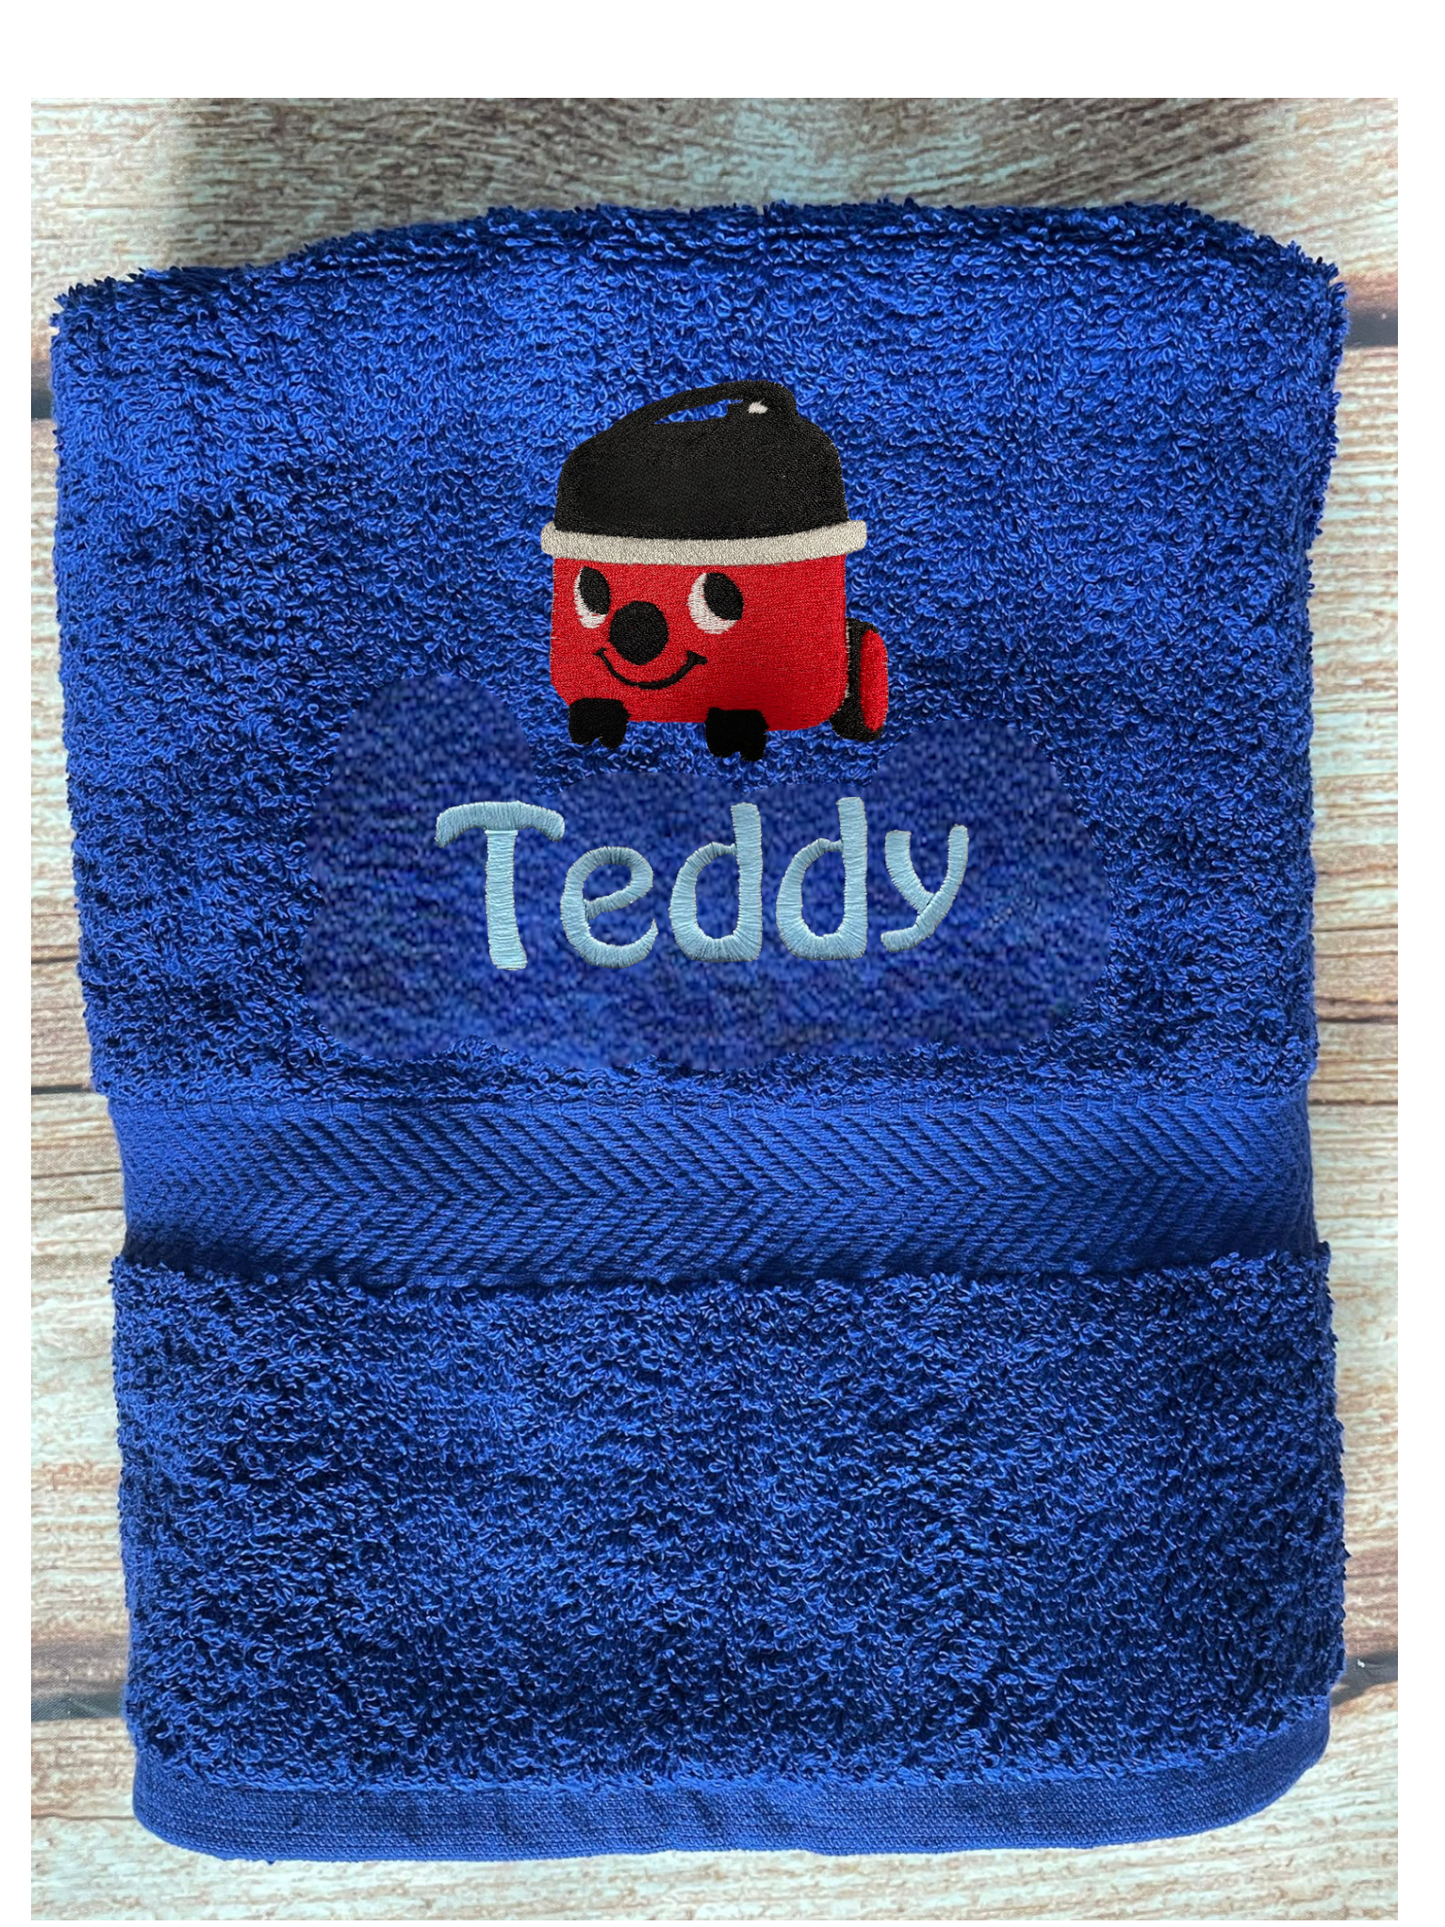 Embroidered personalised swimming or sports towel. Ideal gift // Red hoover